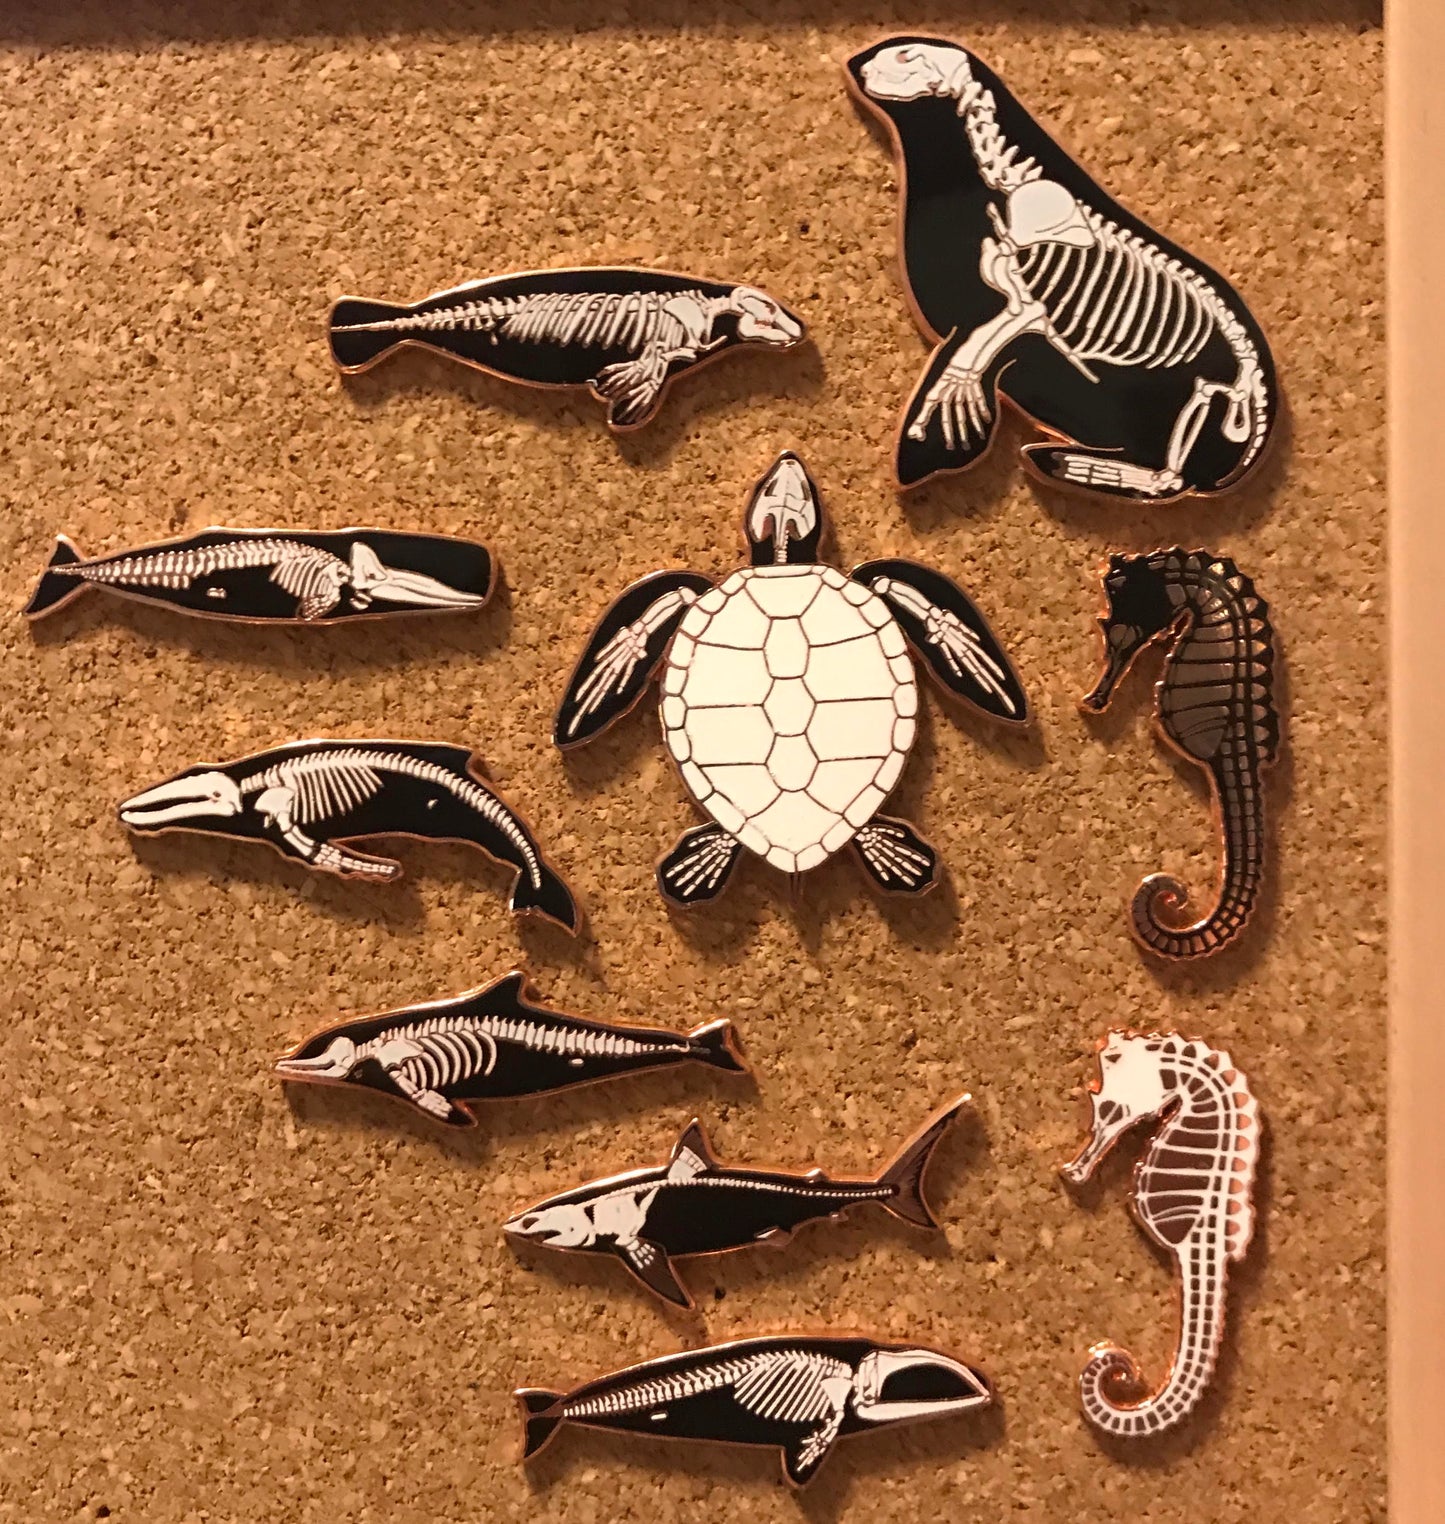 right whale skelepin